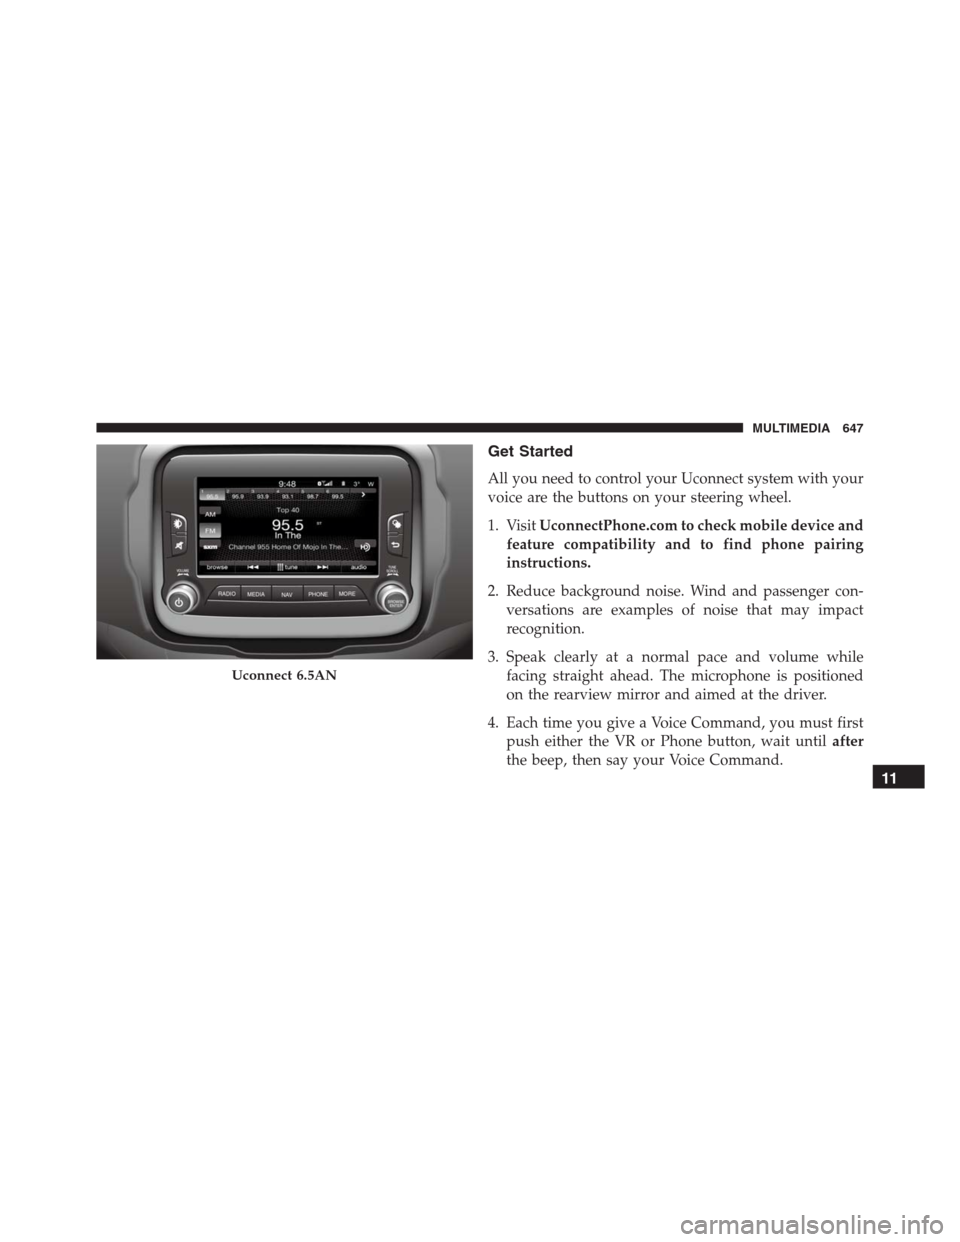 JEEP RENEGADE 2016 1.G Owners Manual Get Started
All you need to control your Uconnect system with your
voice are the buttons on your steering wheel.
1. VisitUconnectPhone.com to check mobile device and
feature compatibility and to find 